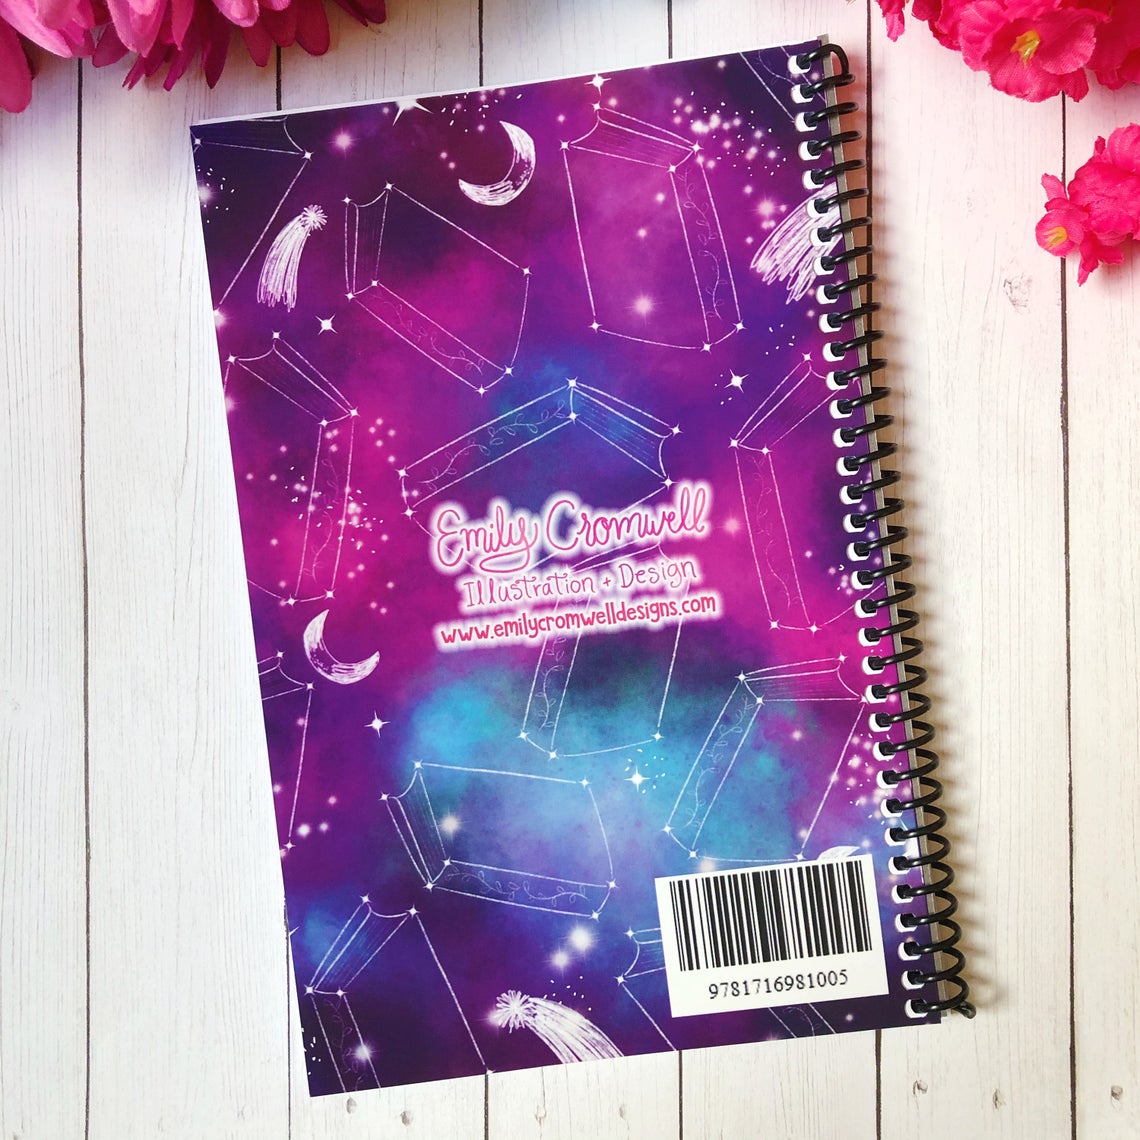 Floral Book Review Journal